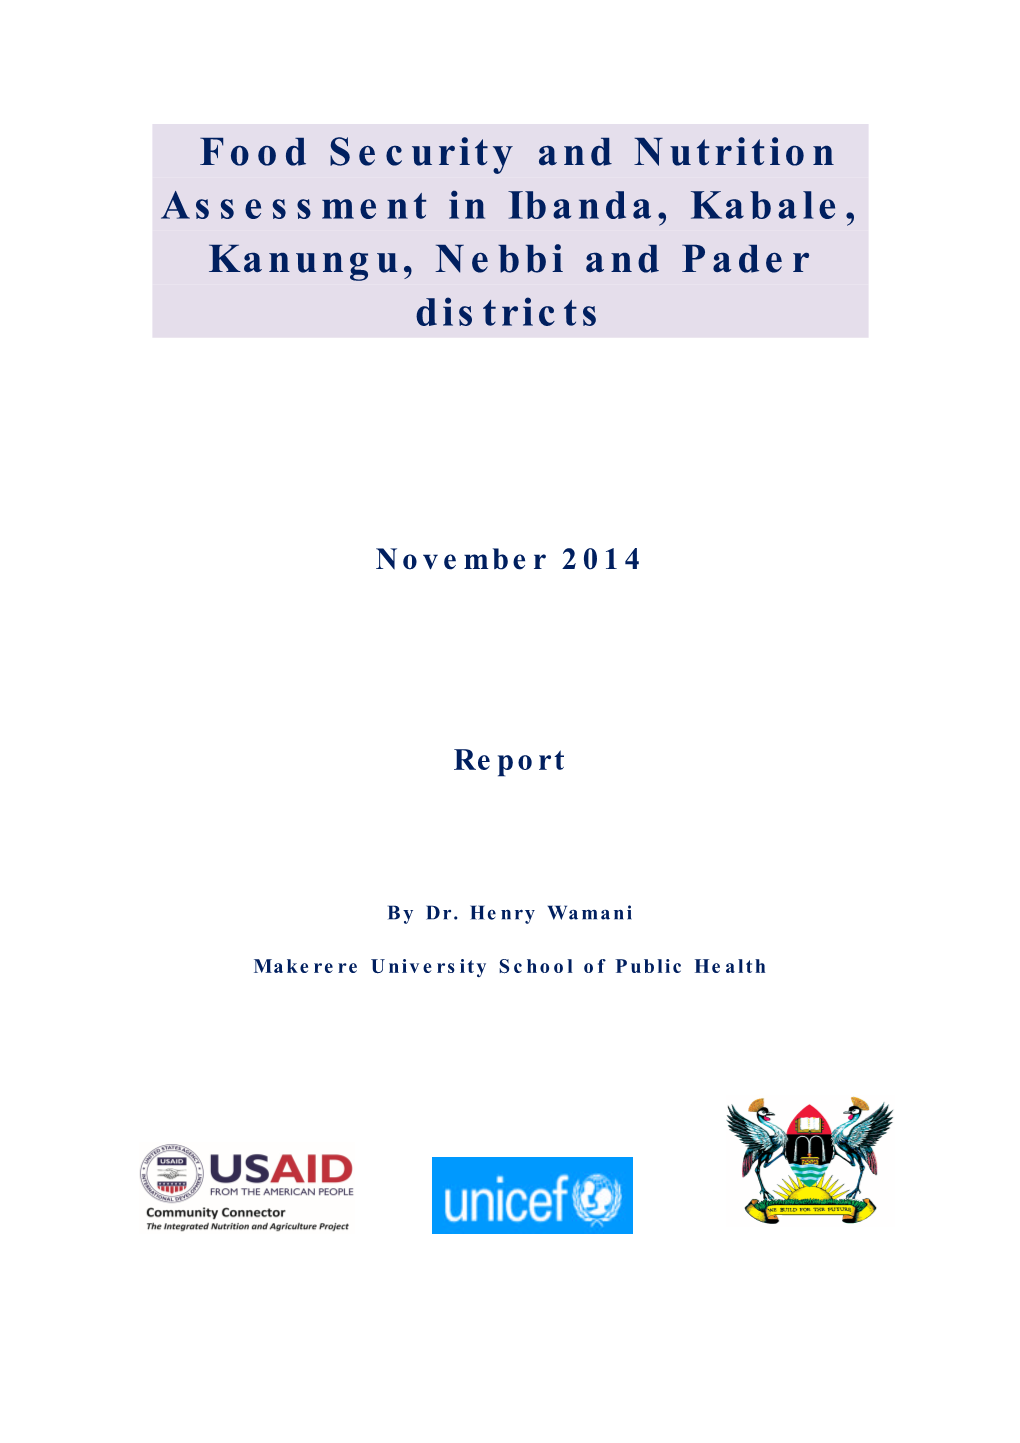 Food Security and Nutrition Assessment in Ibanda, Kabale, Kanungu, Nebbi and Pader Districts